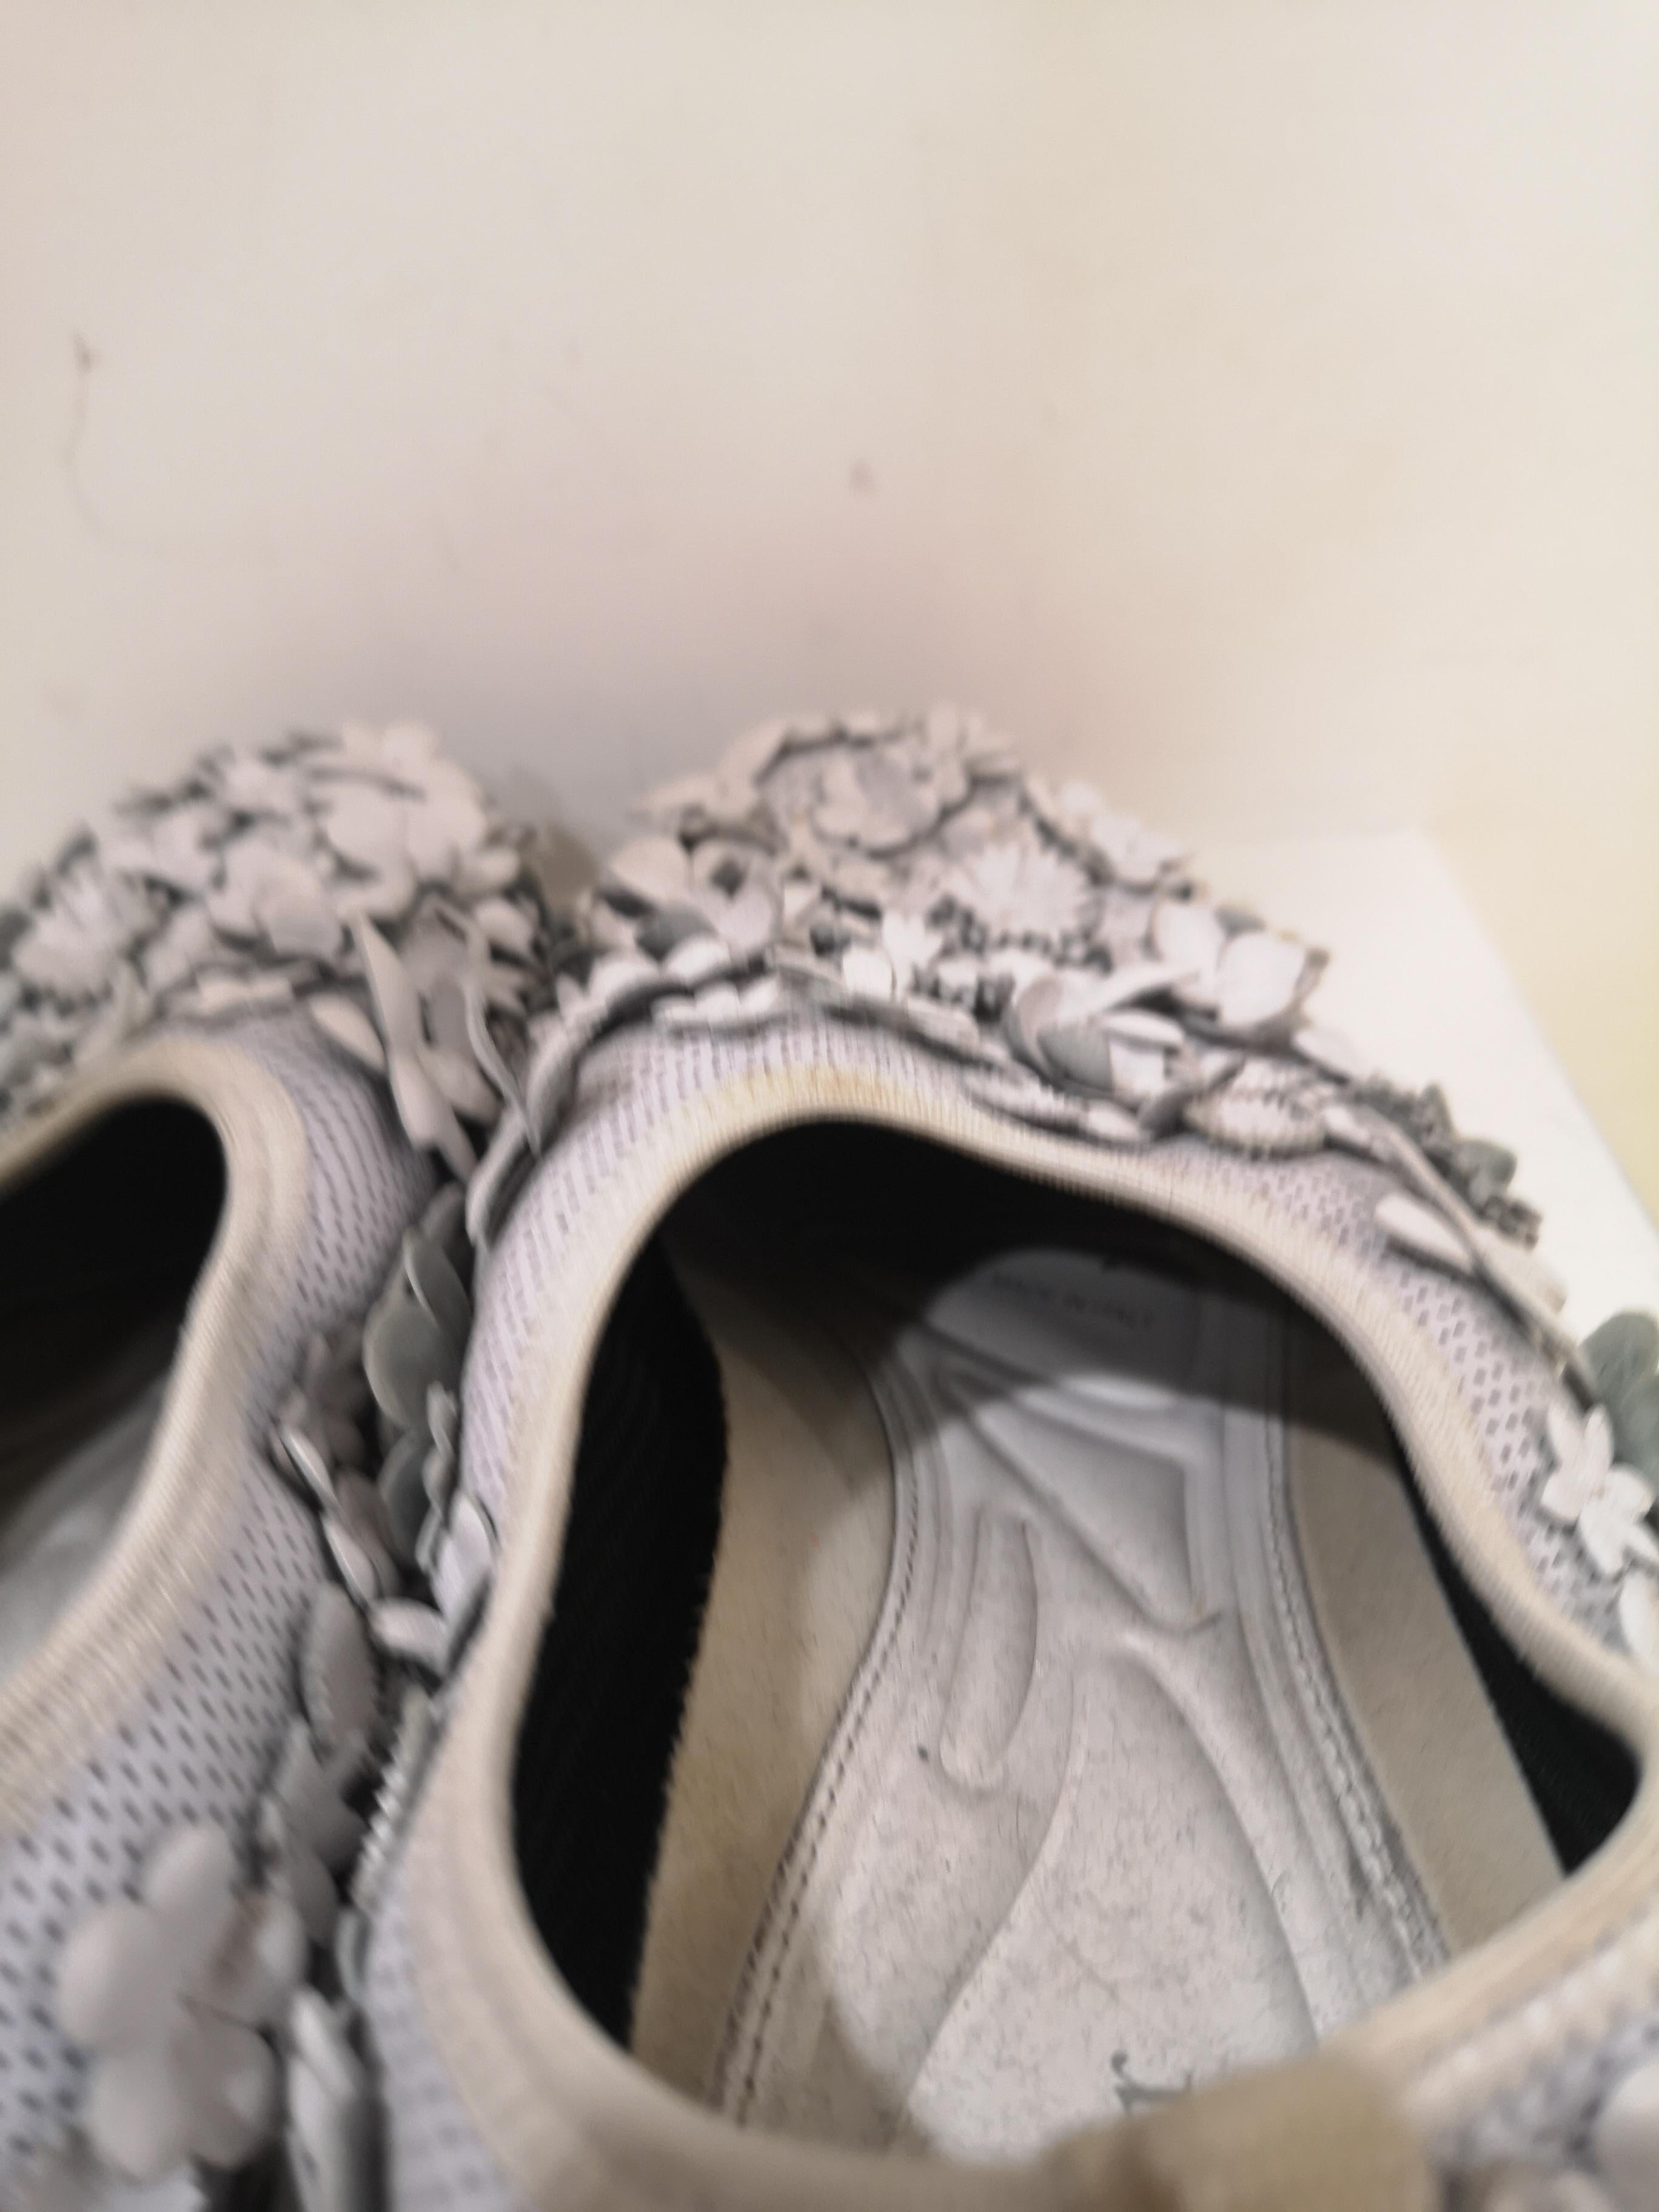 Christian Dior White flowers Shoes unworn 6